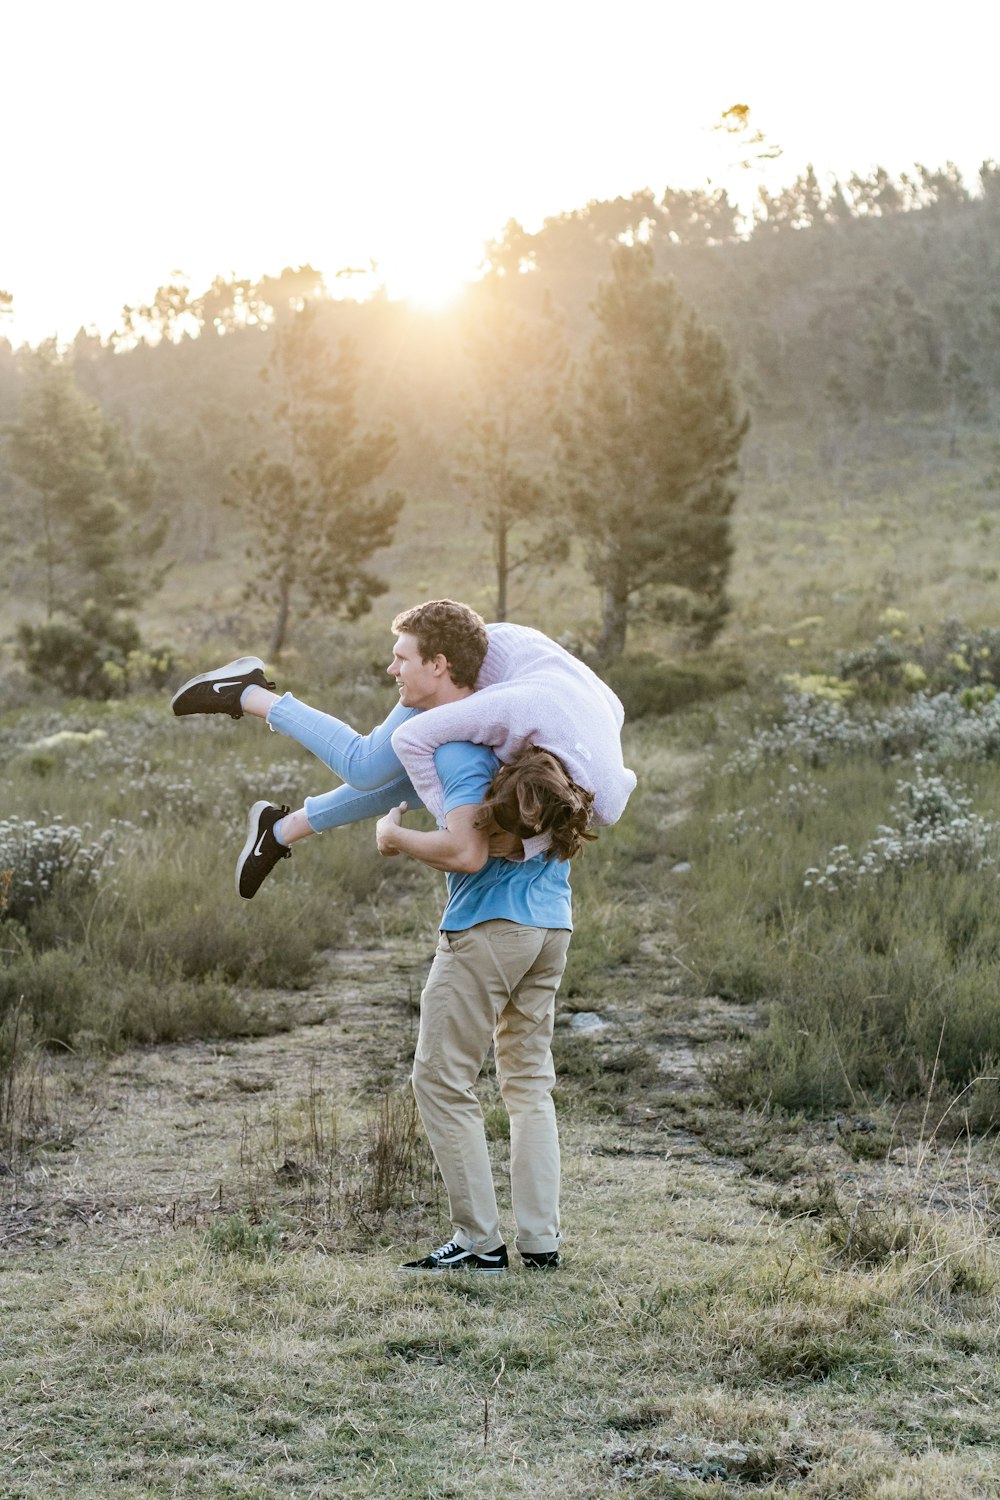 man in white shirt carrying woman in blue jacket during daytime